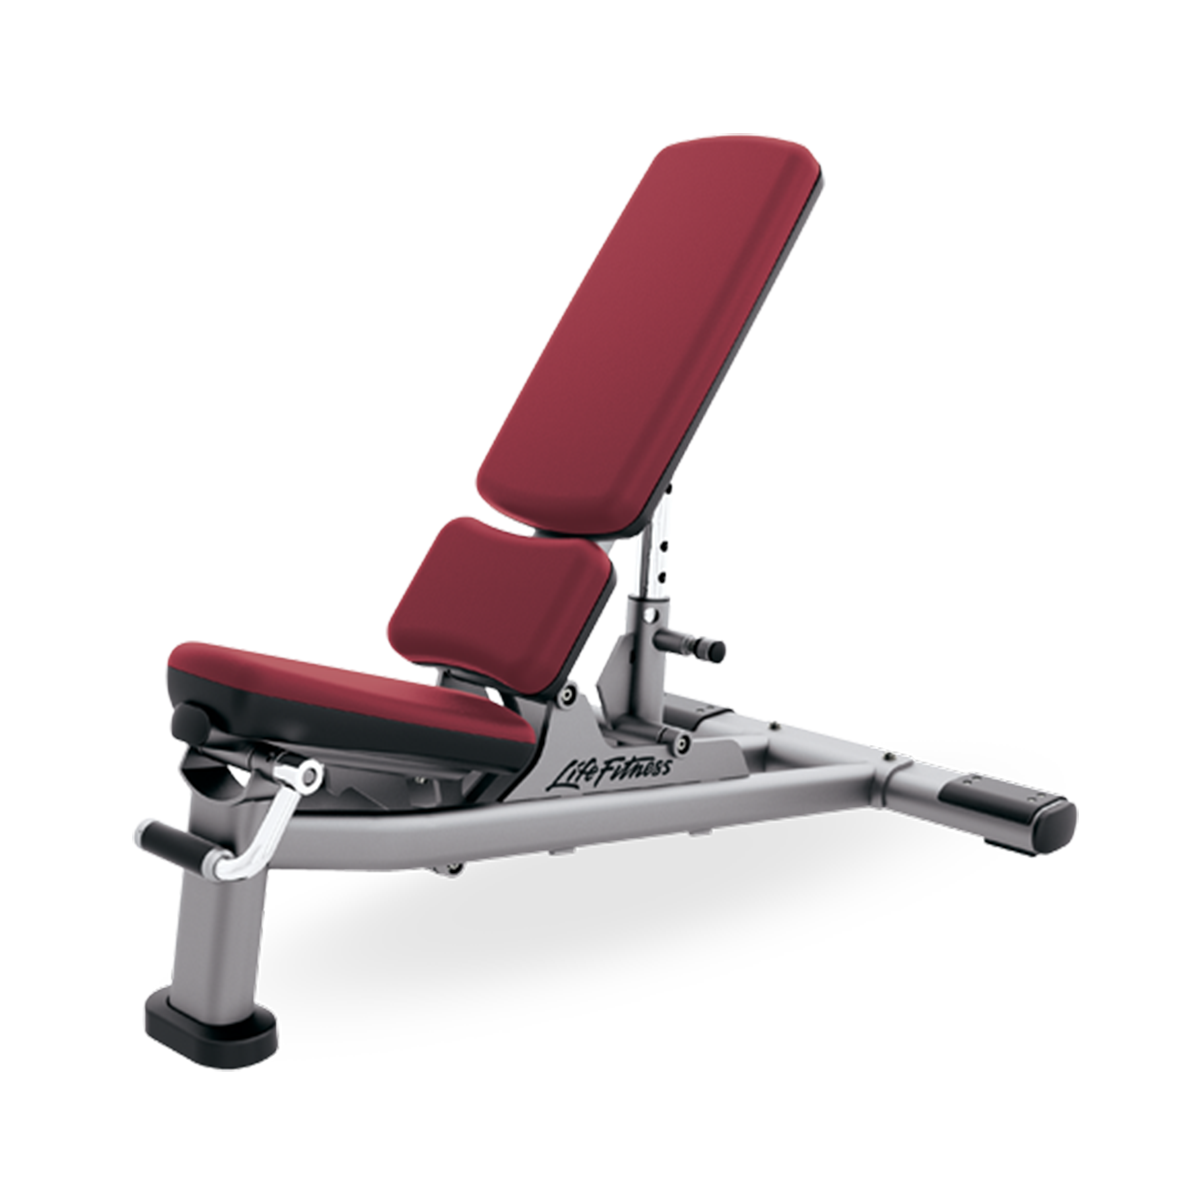 Buy Gym Bench with Warranty from Manufacturer in UAE